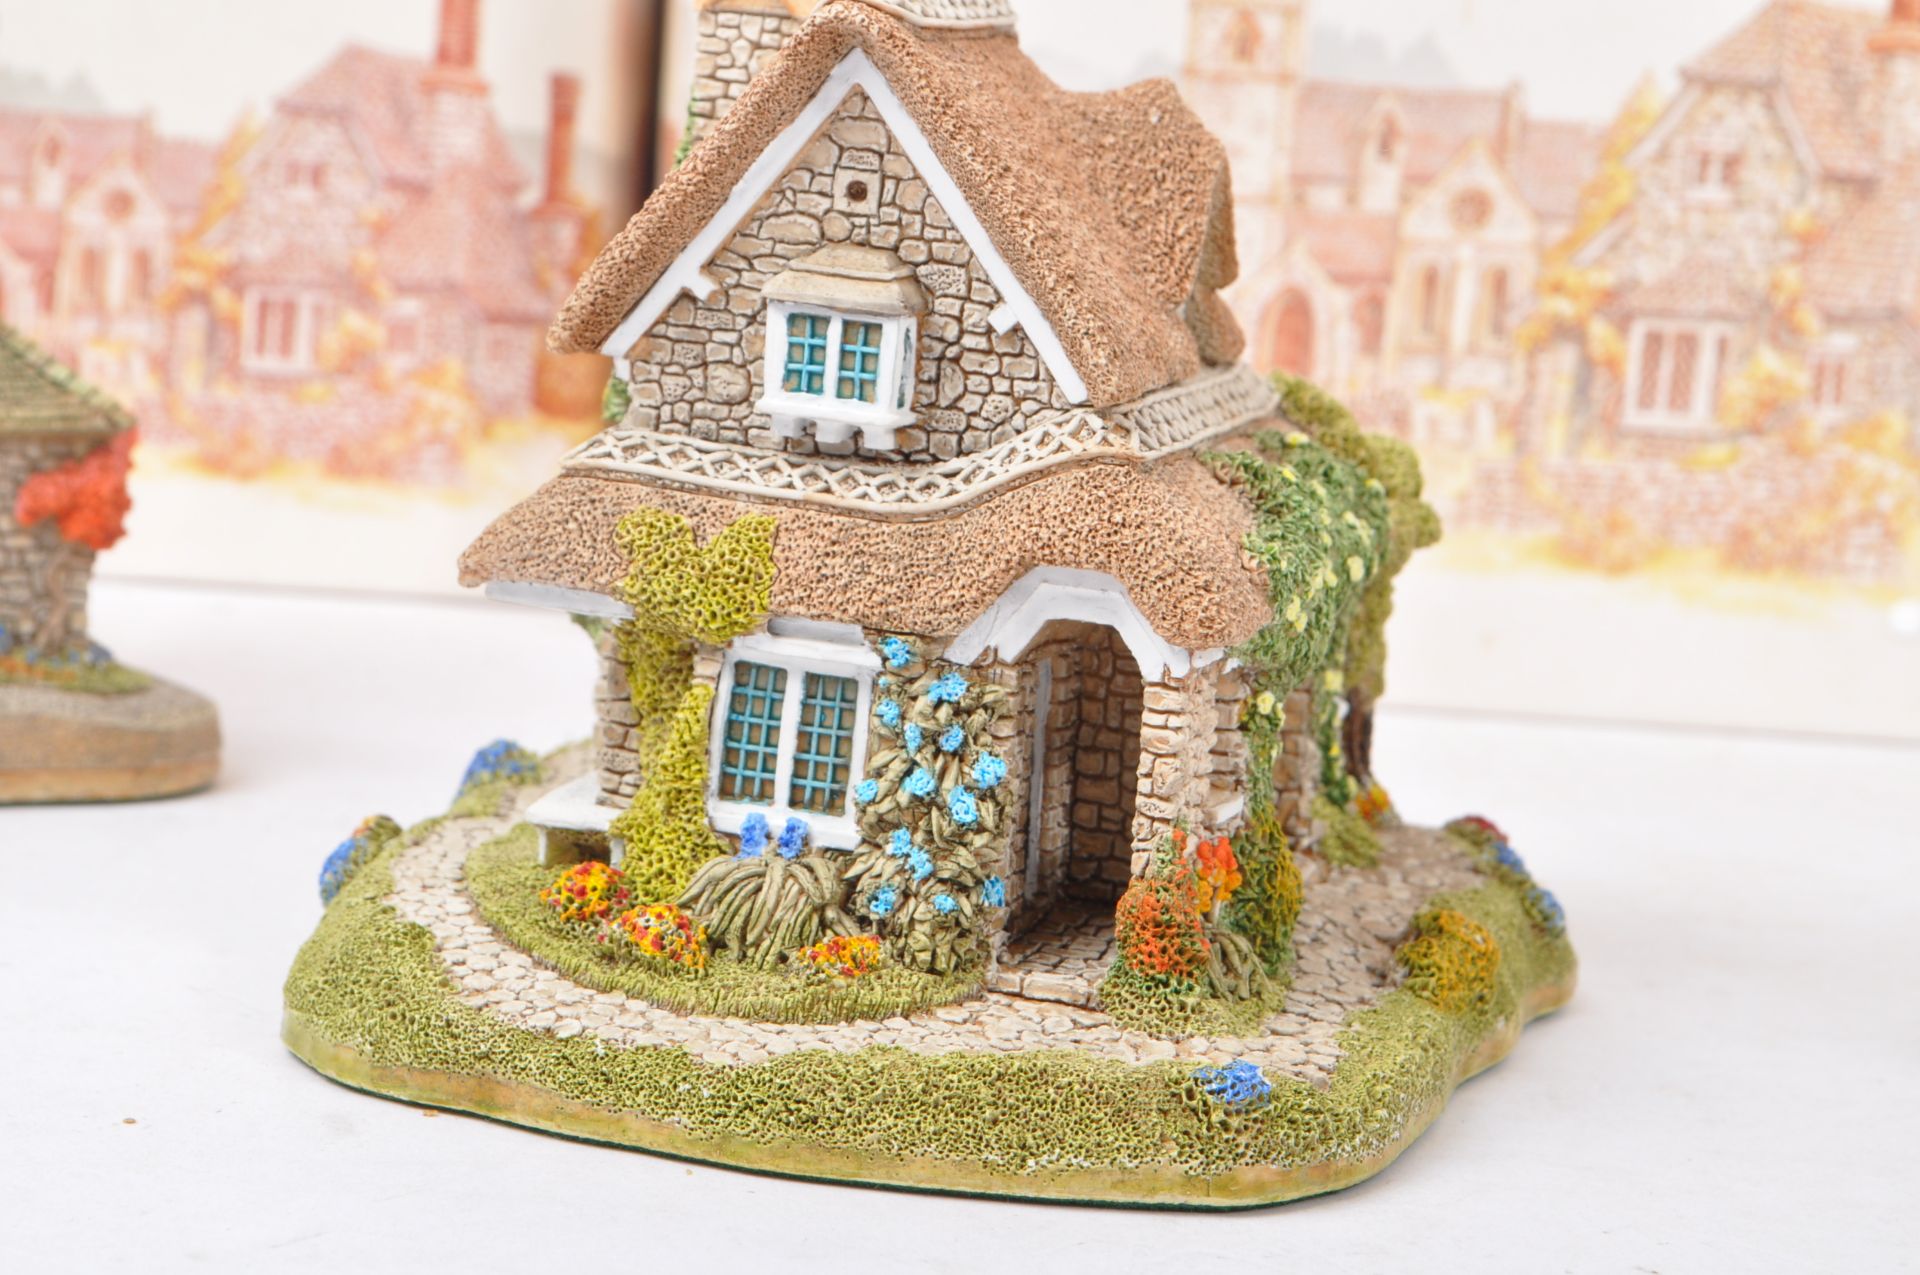 LILLIPUT LANE - COLLECTION OF HOUSE / COTTAGE FIGURINES - Image 4 of 15